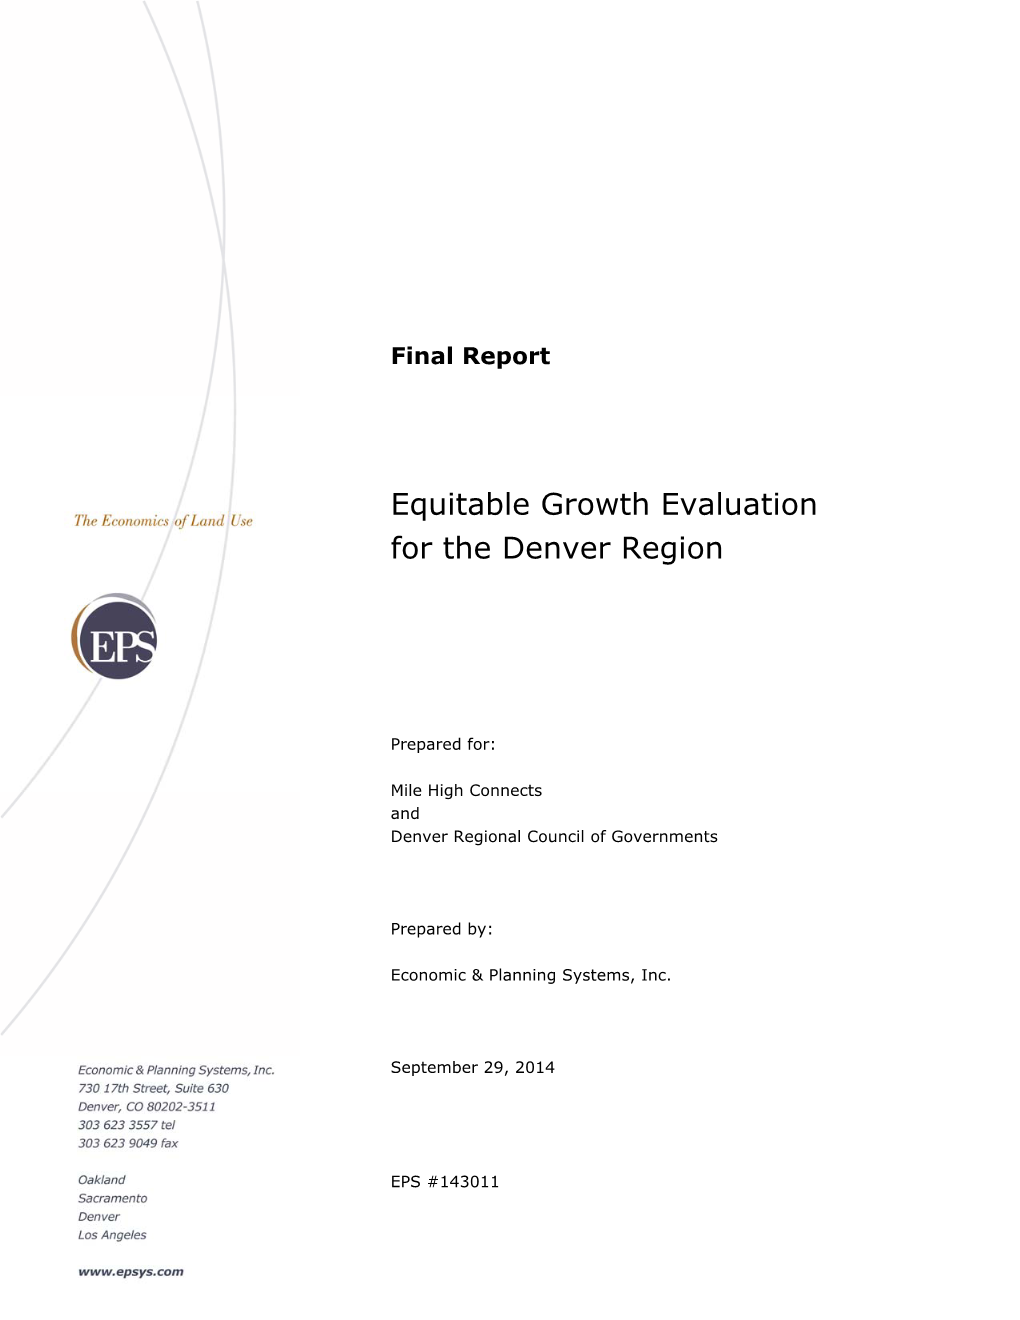 Equitable Growth Evaluation for the Denver Region